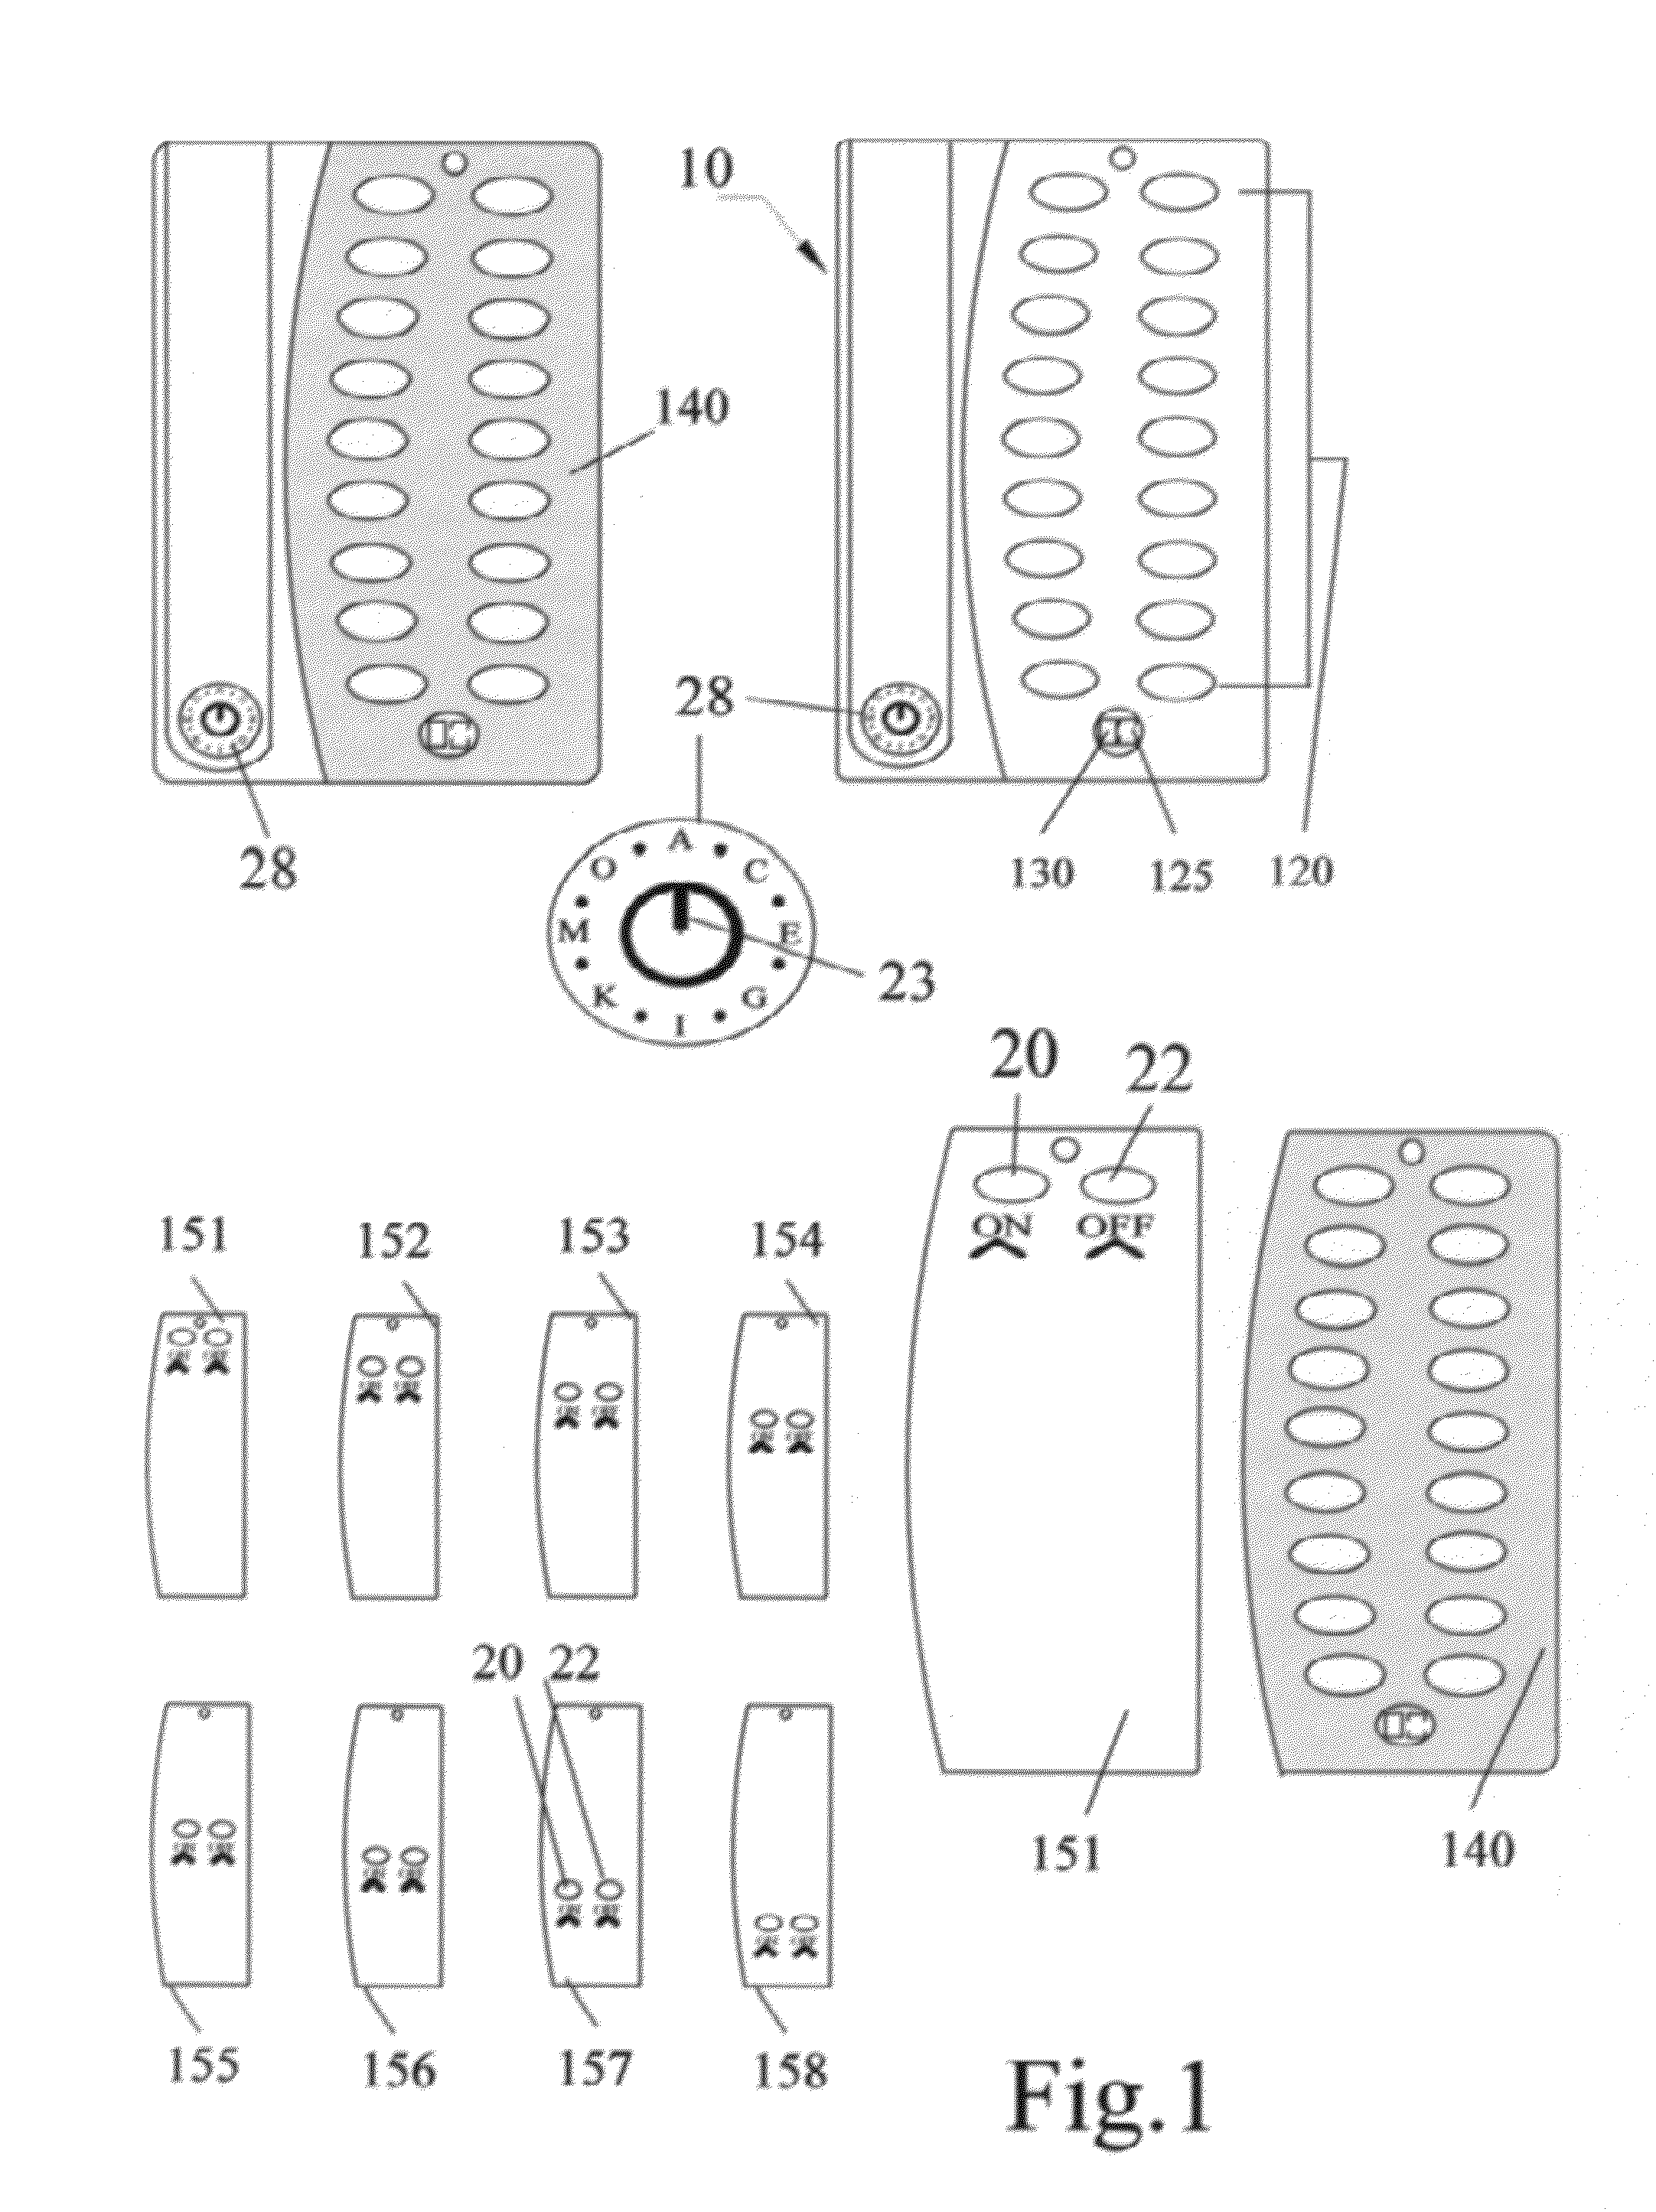 Water supply control apparatus and method for use in homes or other structures